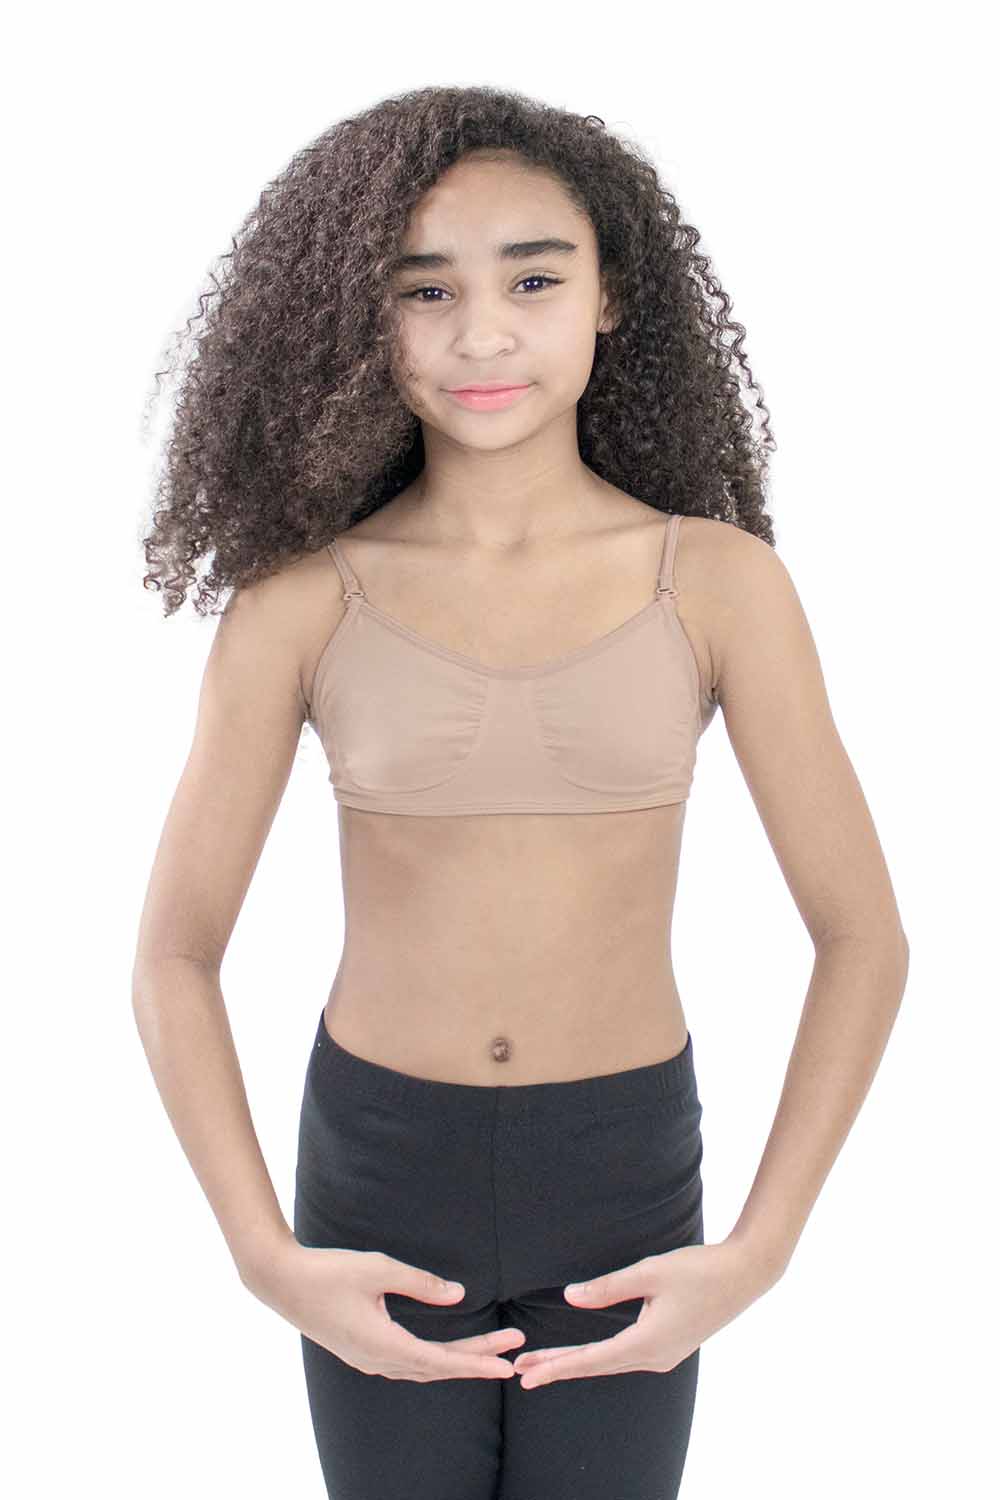 Dance Sports Bras with Clear Straps